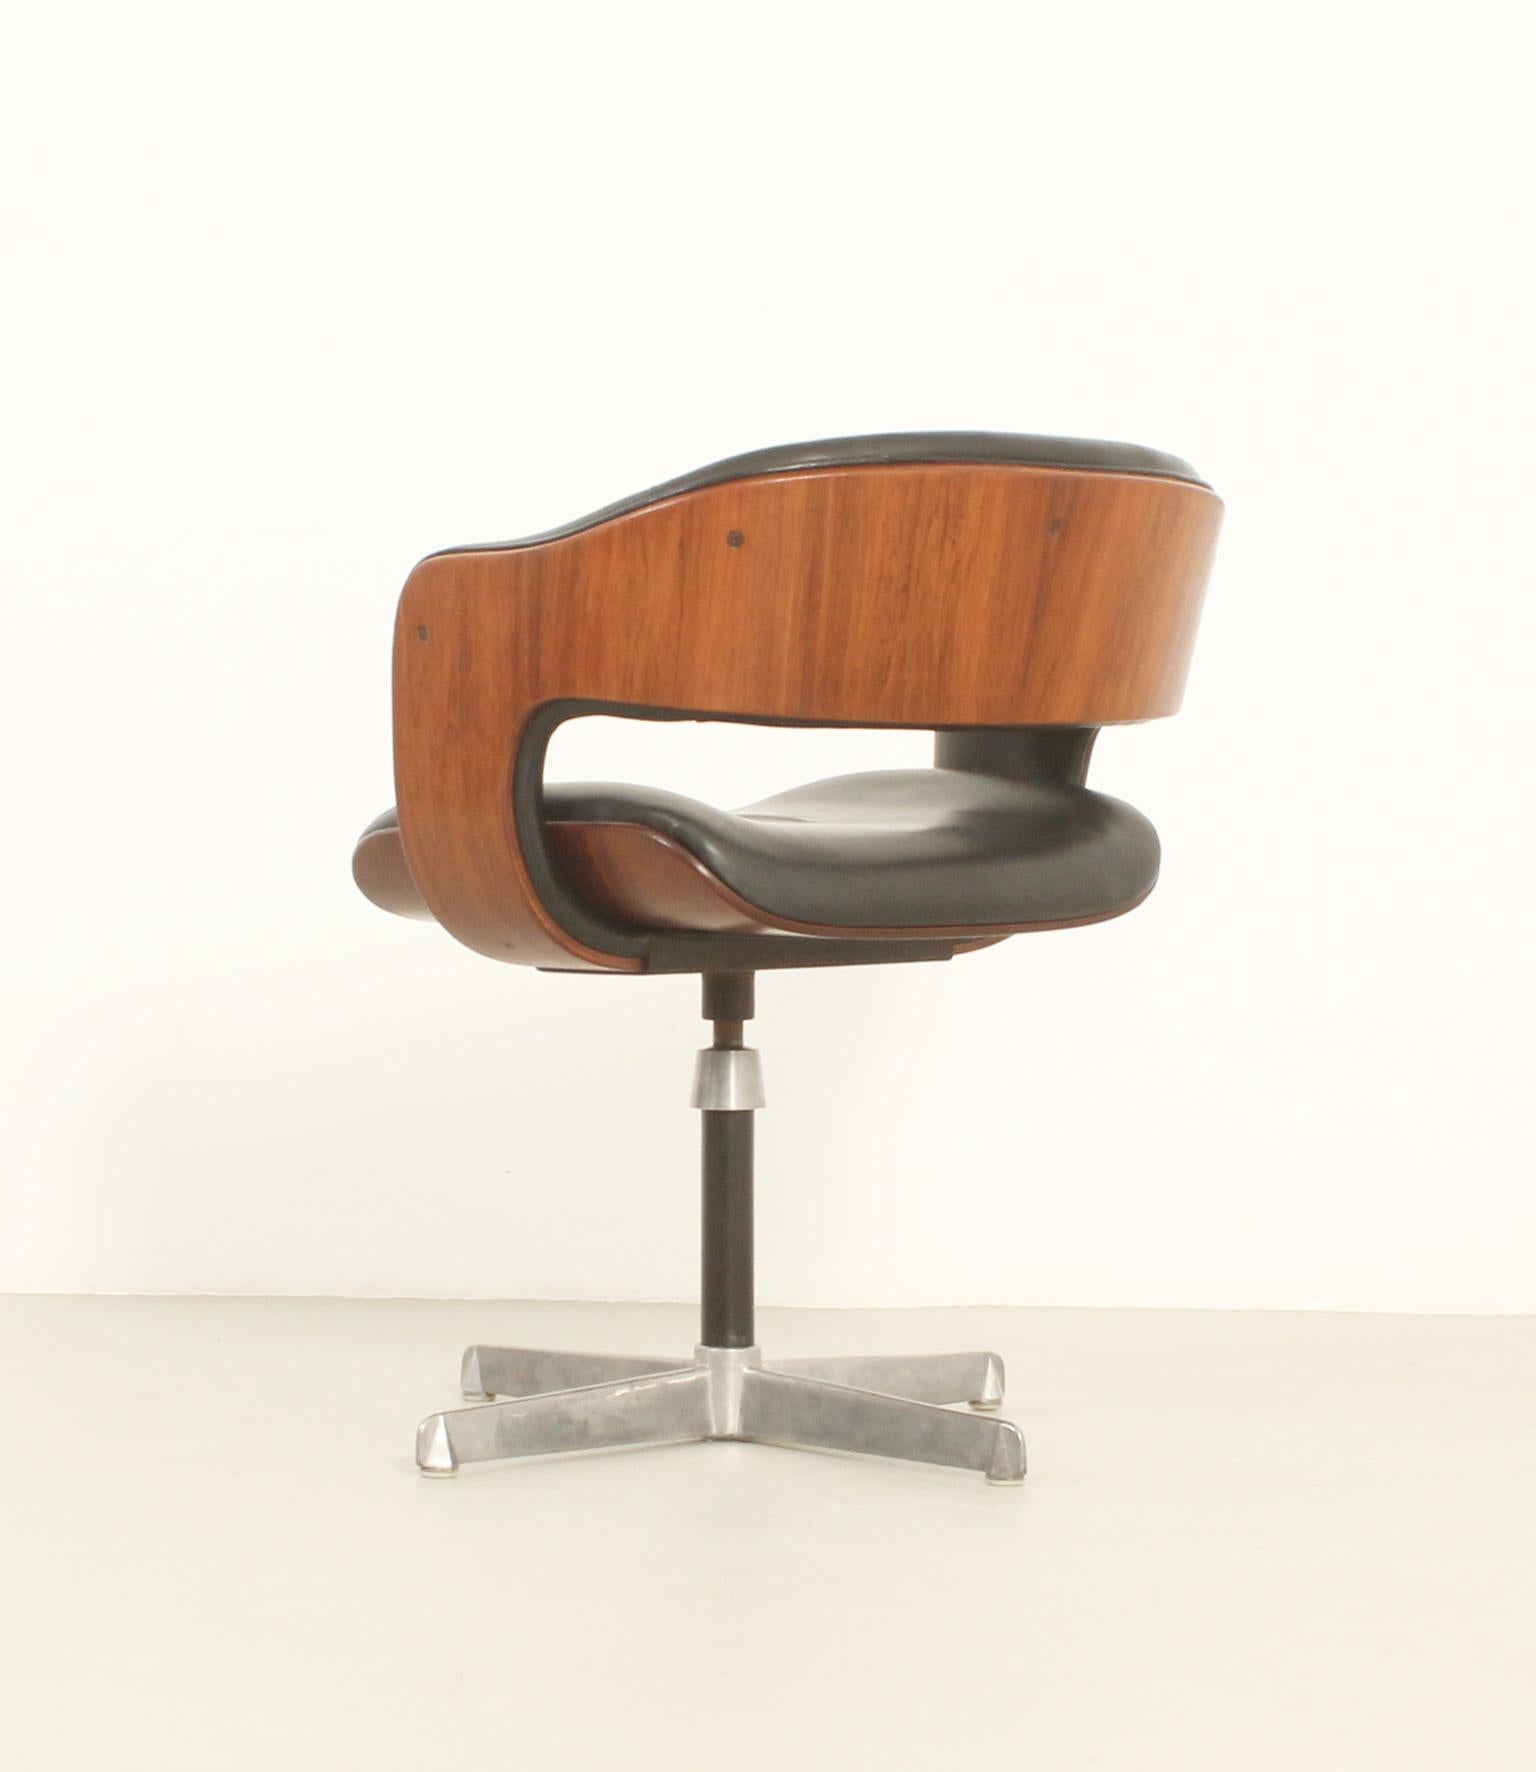 Oxford chair designed in 1963 by British designer Martin Grierson for Arflex, Italy. Hardwood molded shell upholstered in black leather. Swivel base in metal and polished steel adjustable in height. 